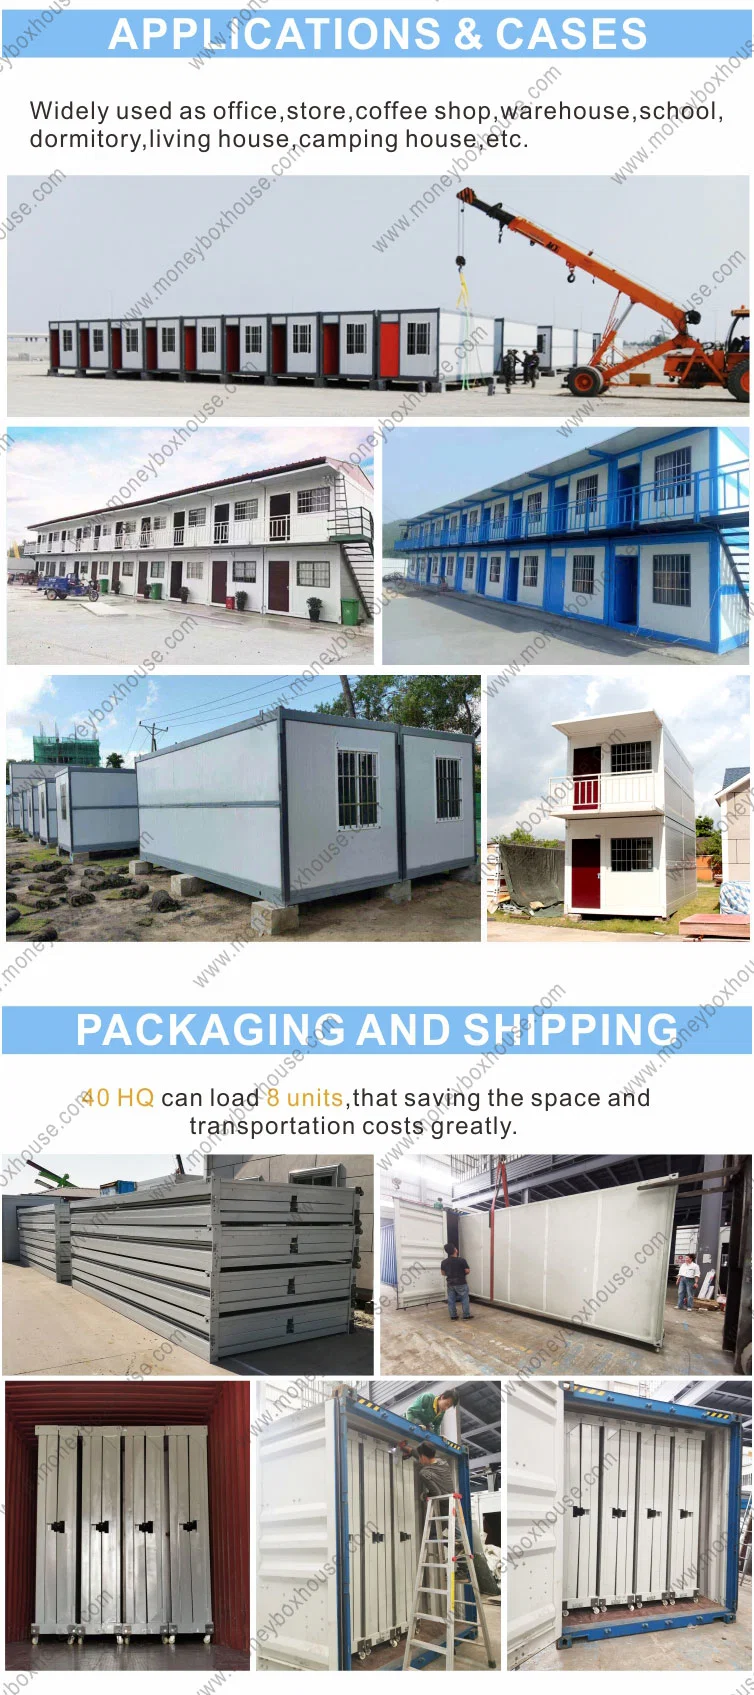 Construction Site Outdoor Building Prefab Prefabricated Foldable Container Portable Collapsible Shed